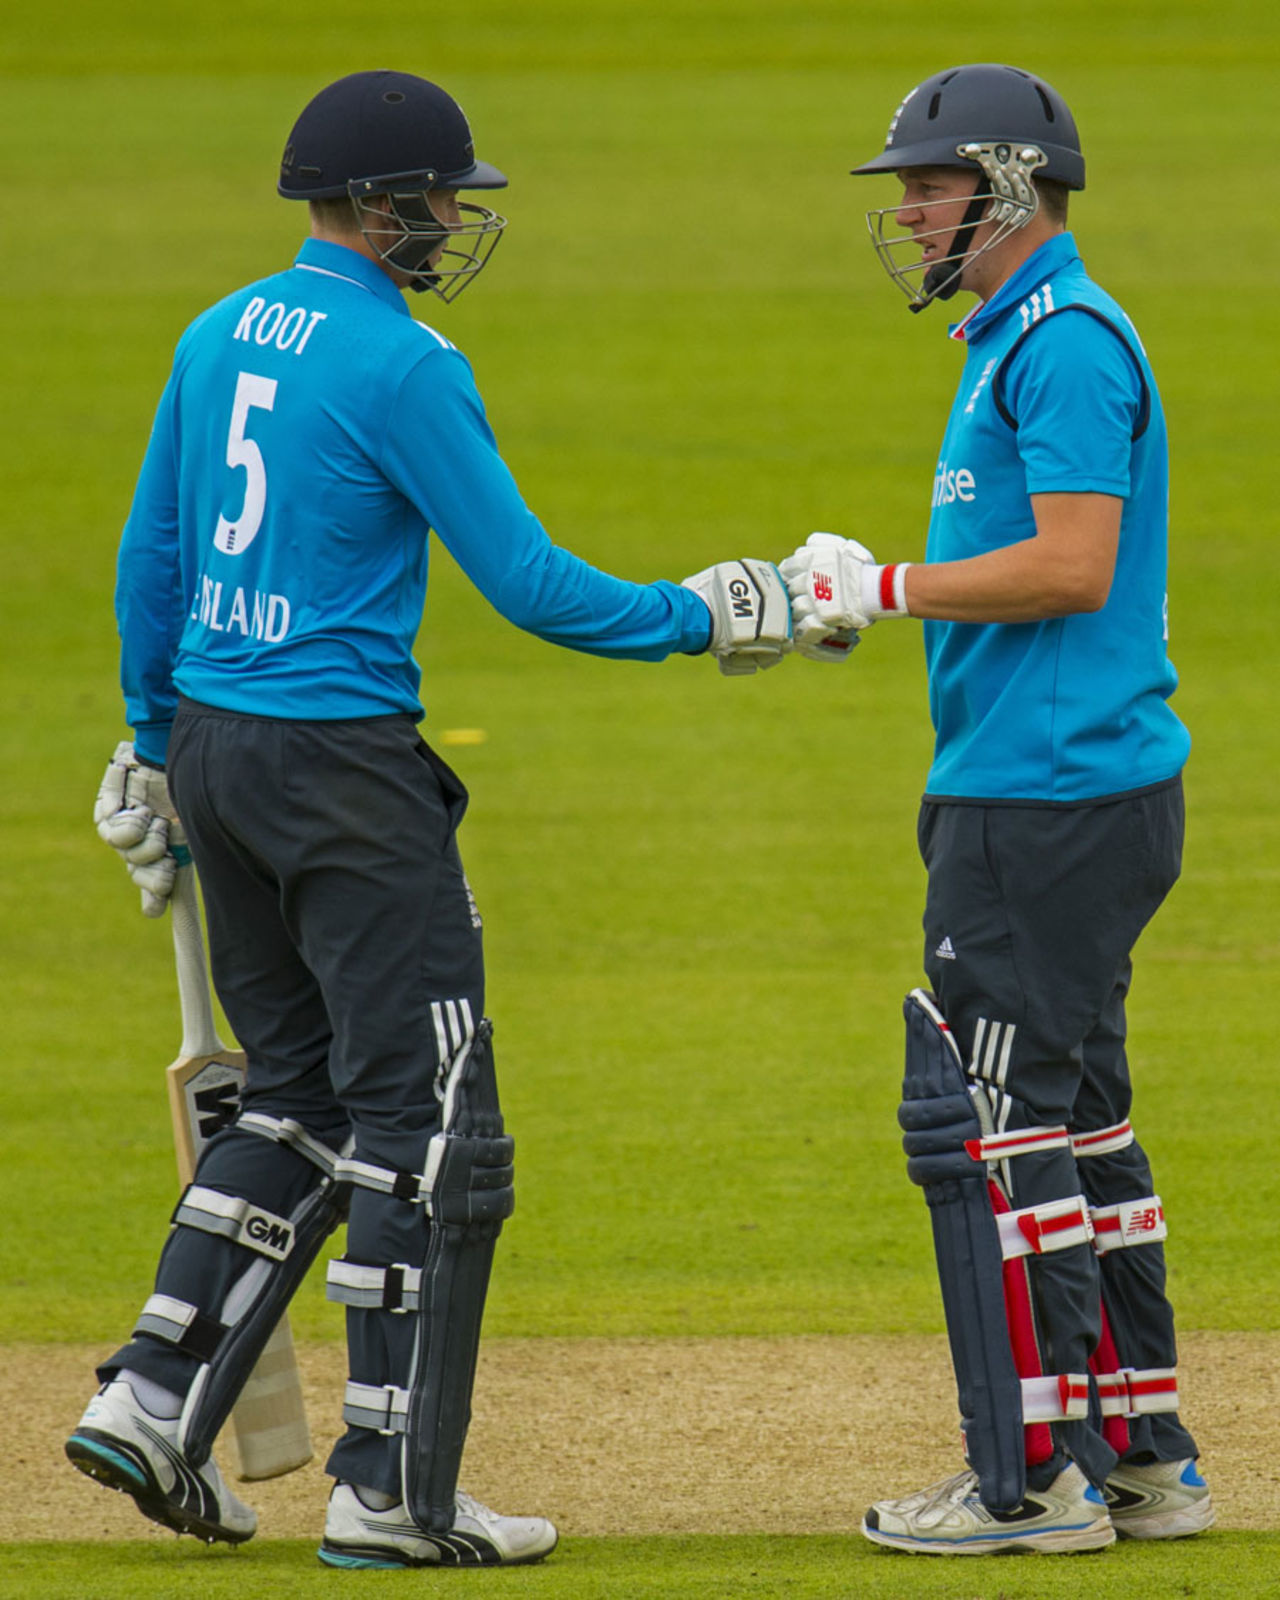 Joe Root and Gary Ballance put in 84 for the third wicket, England v Sri Lanka, 4th ODI, Lord's, May 31, 2014